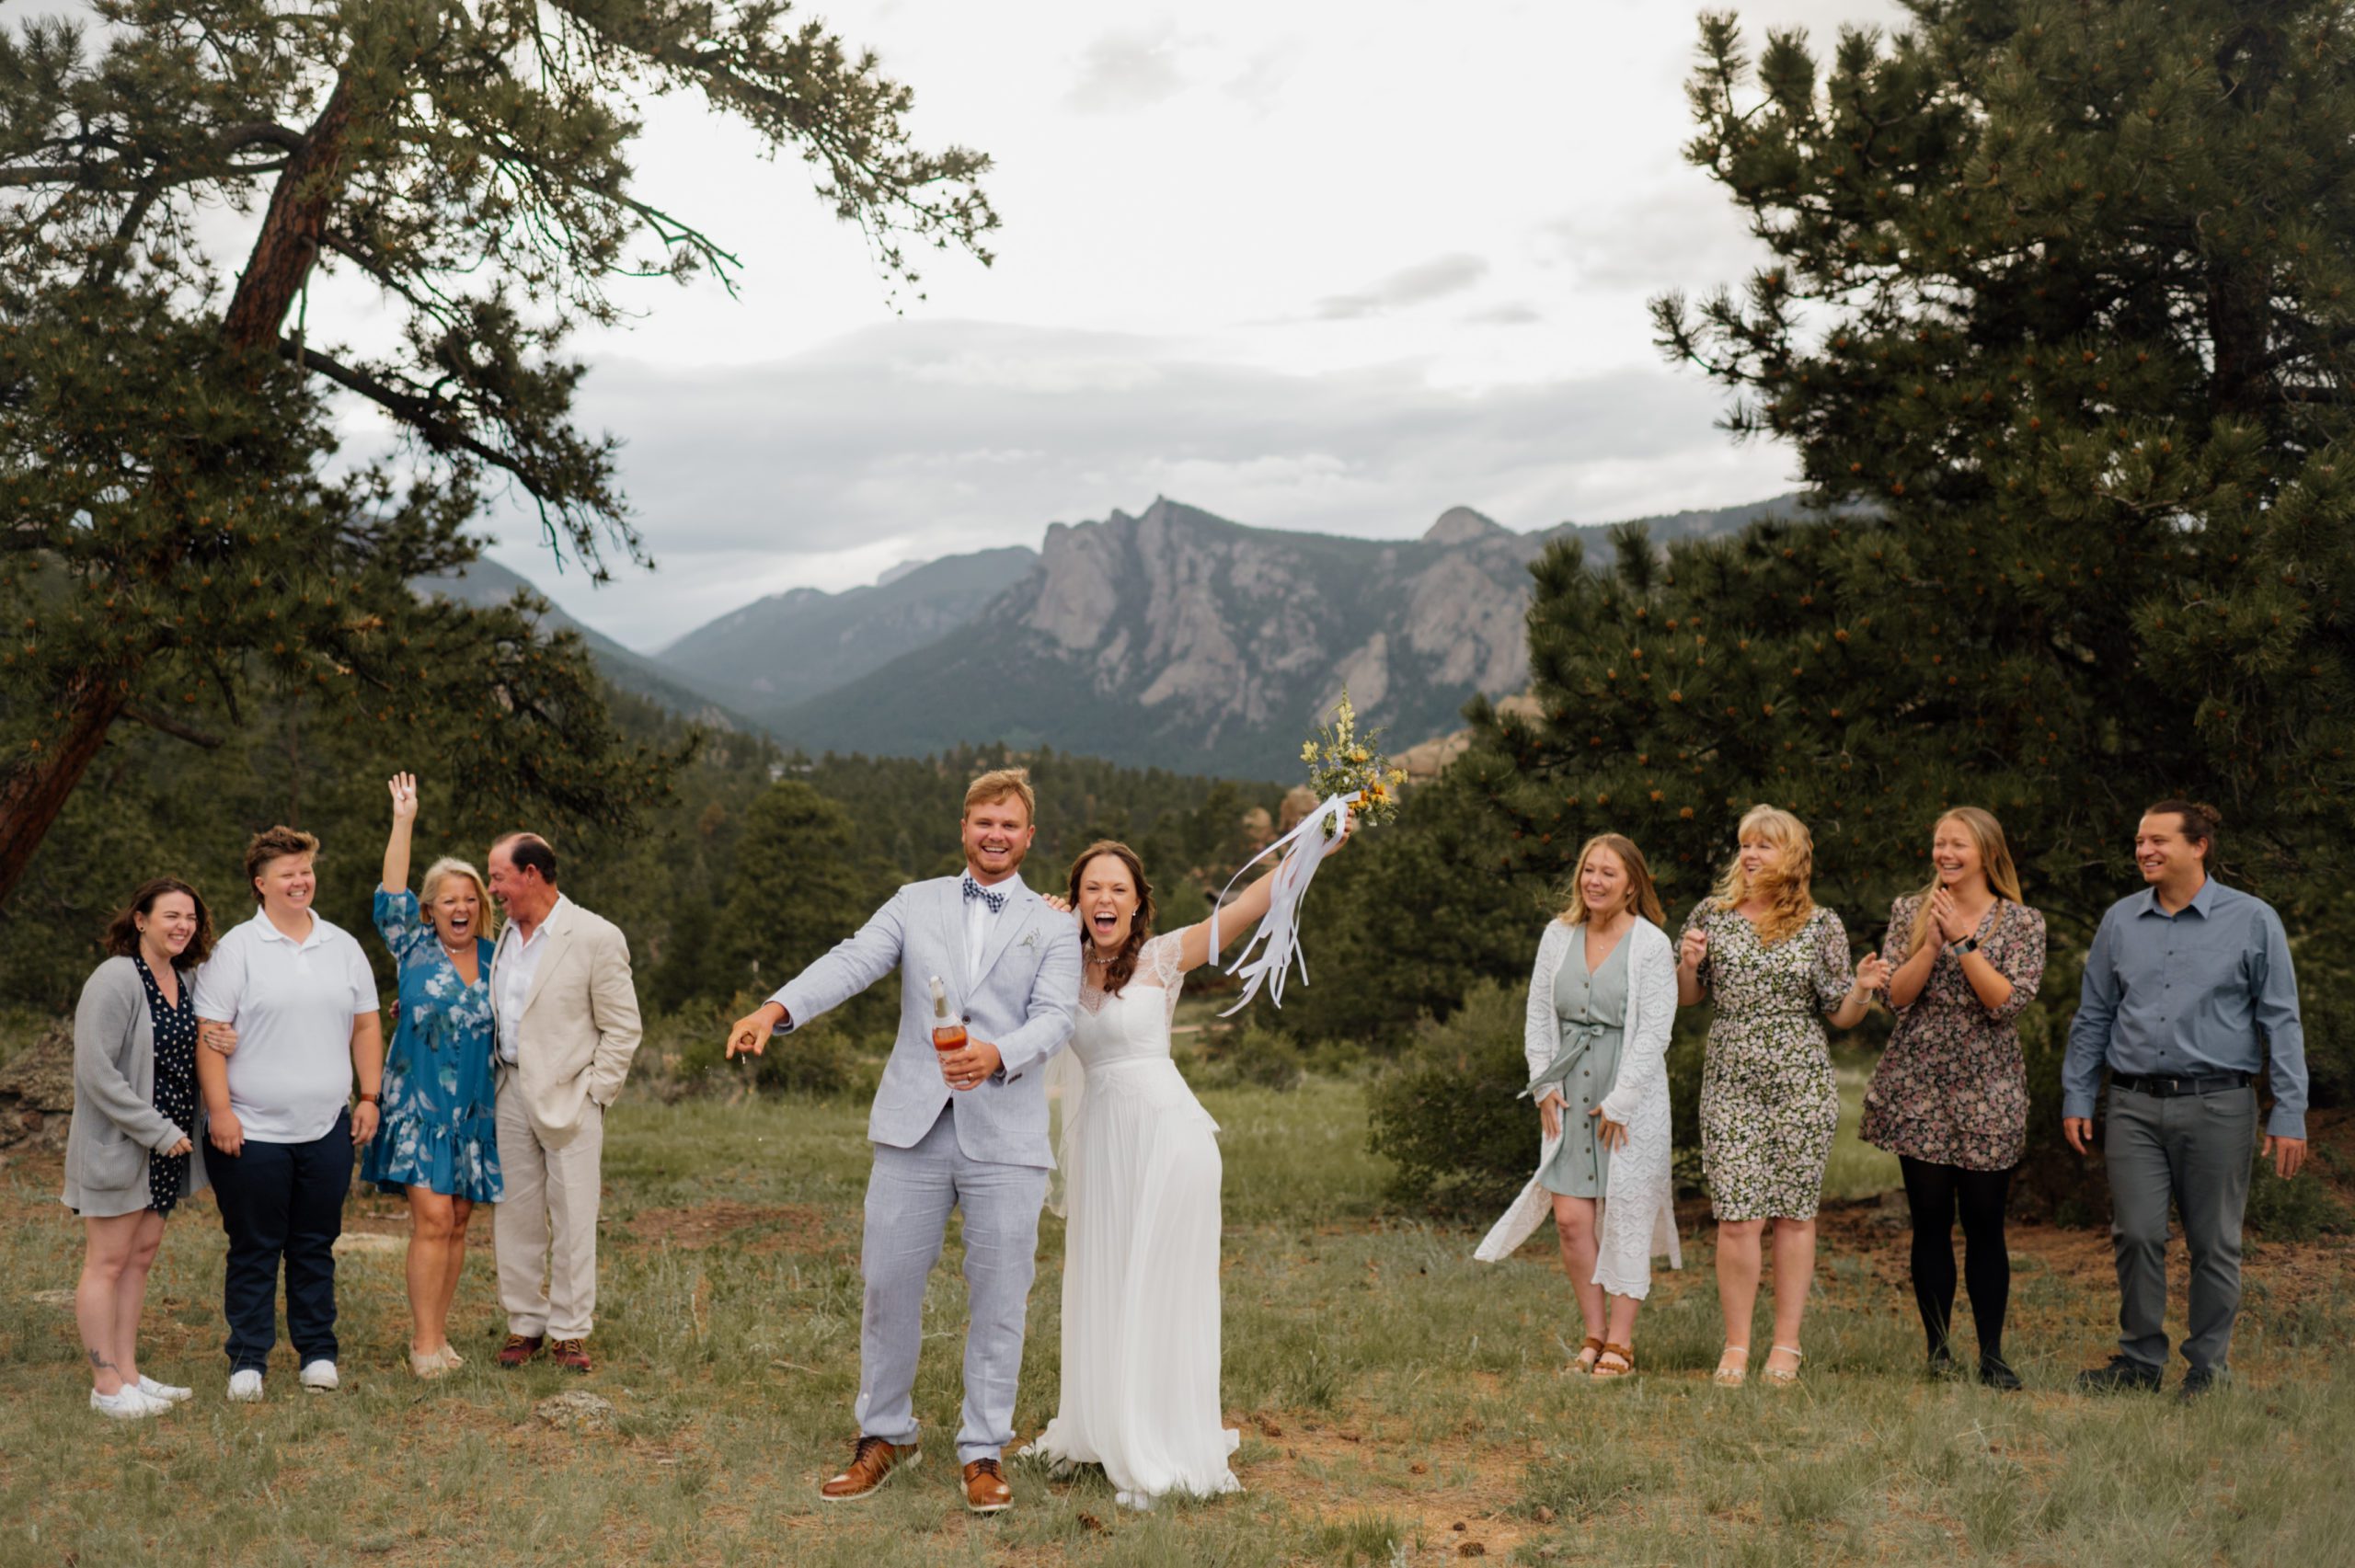 The bride and the groom celebrate after their elopement ceremony at Knoll Willows in Estes Park.